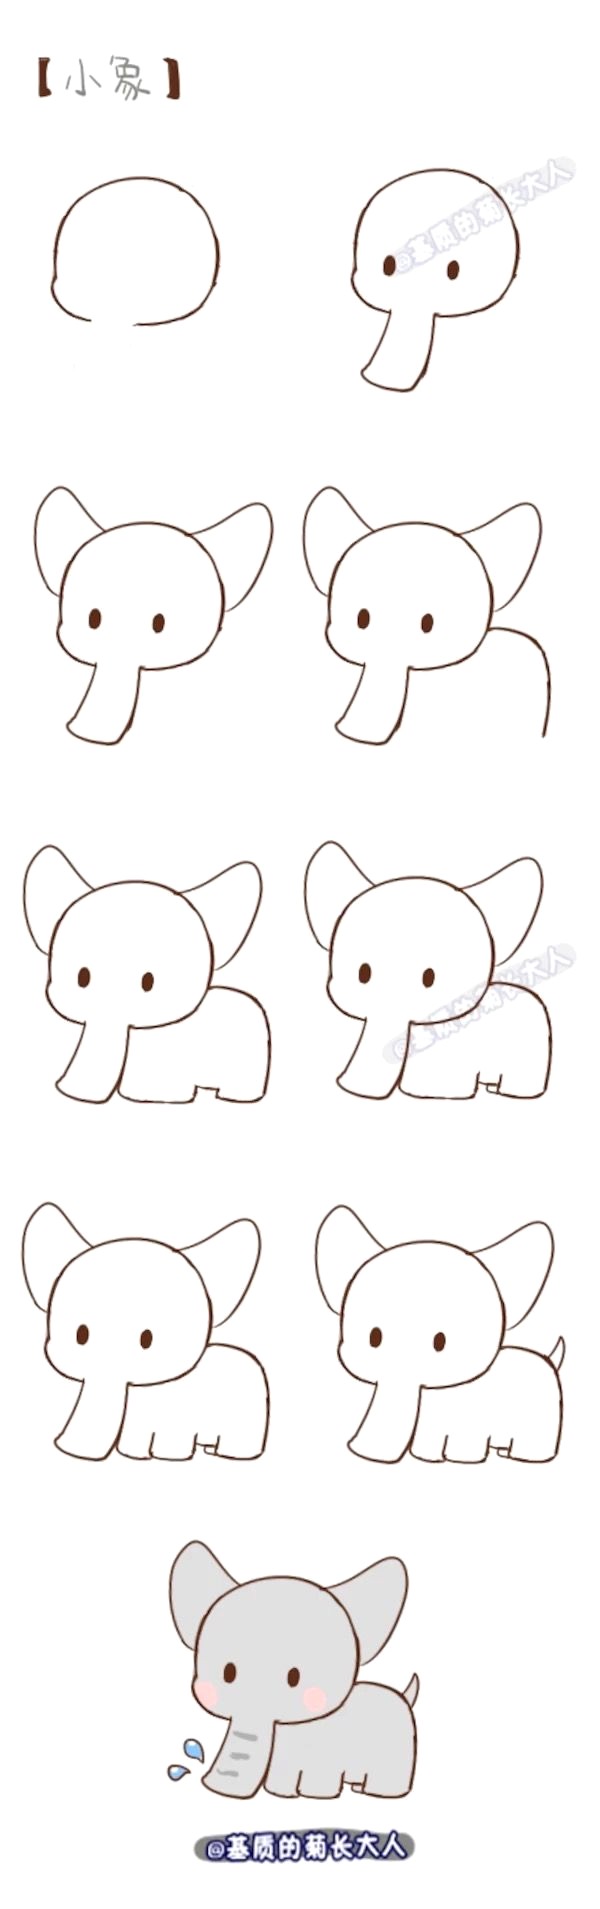 Easy Drawing Ideas For Beginners Step By Step Animals At